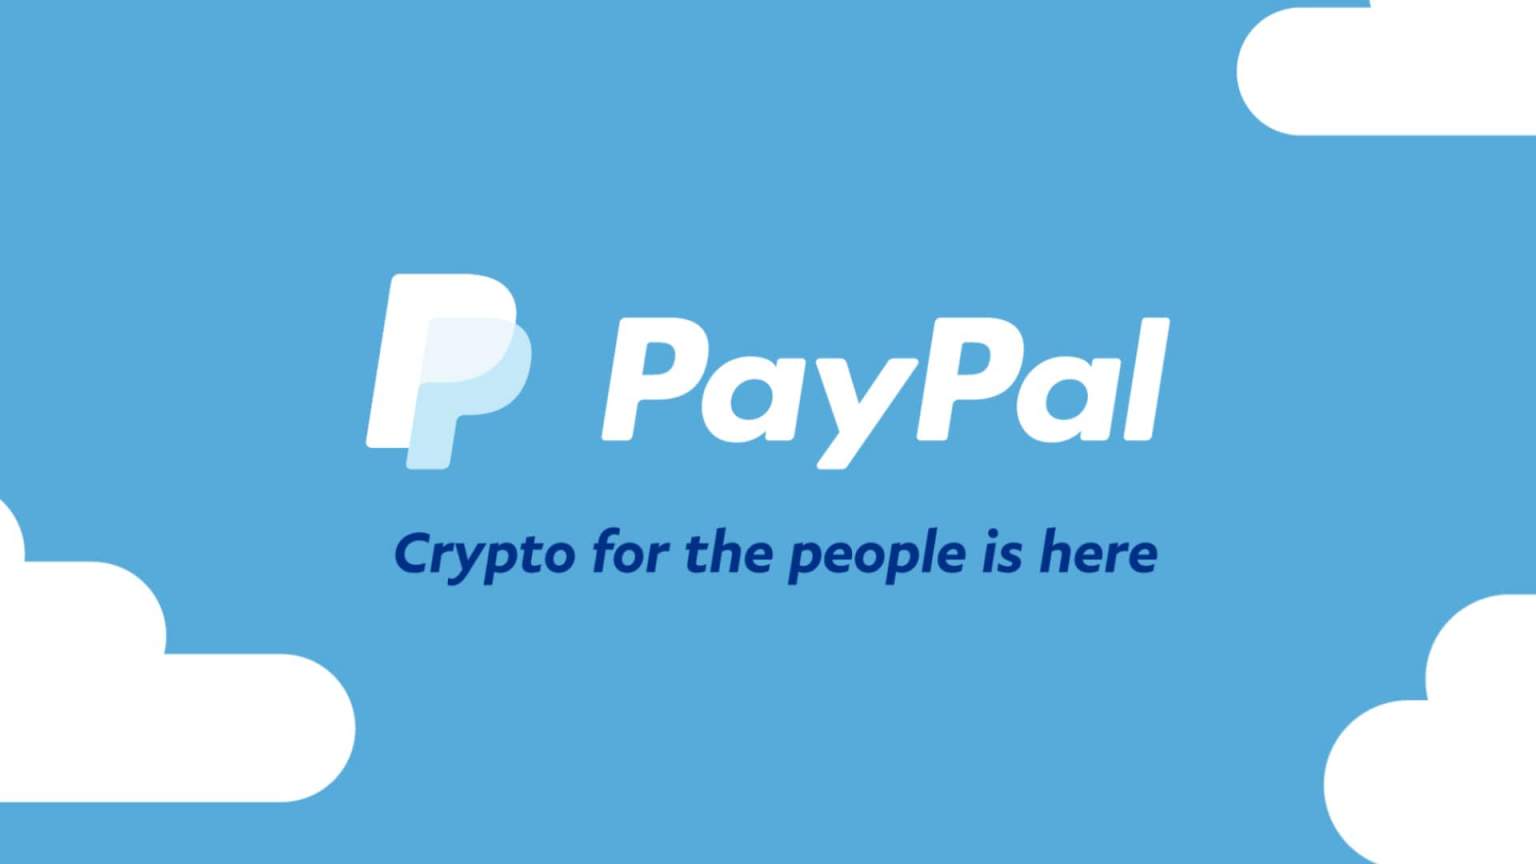 when can i buy crypto on paypal